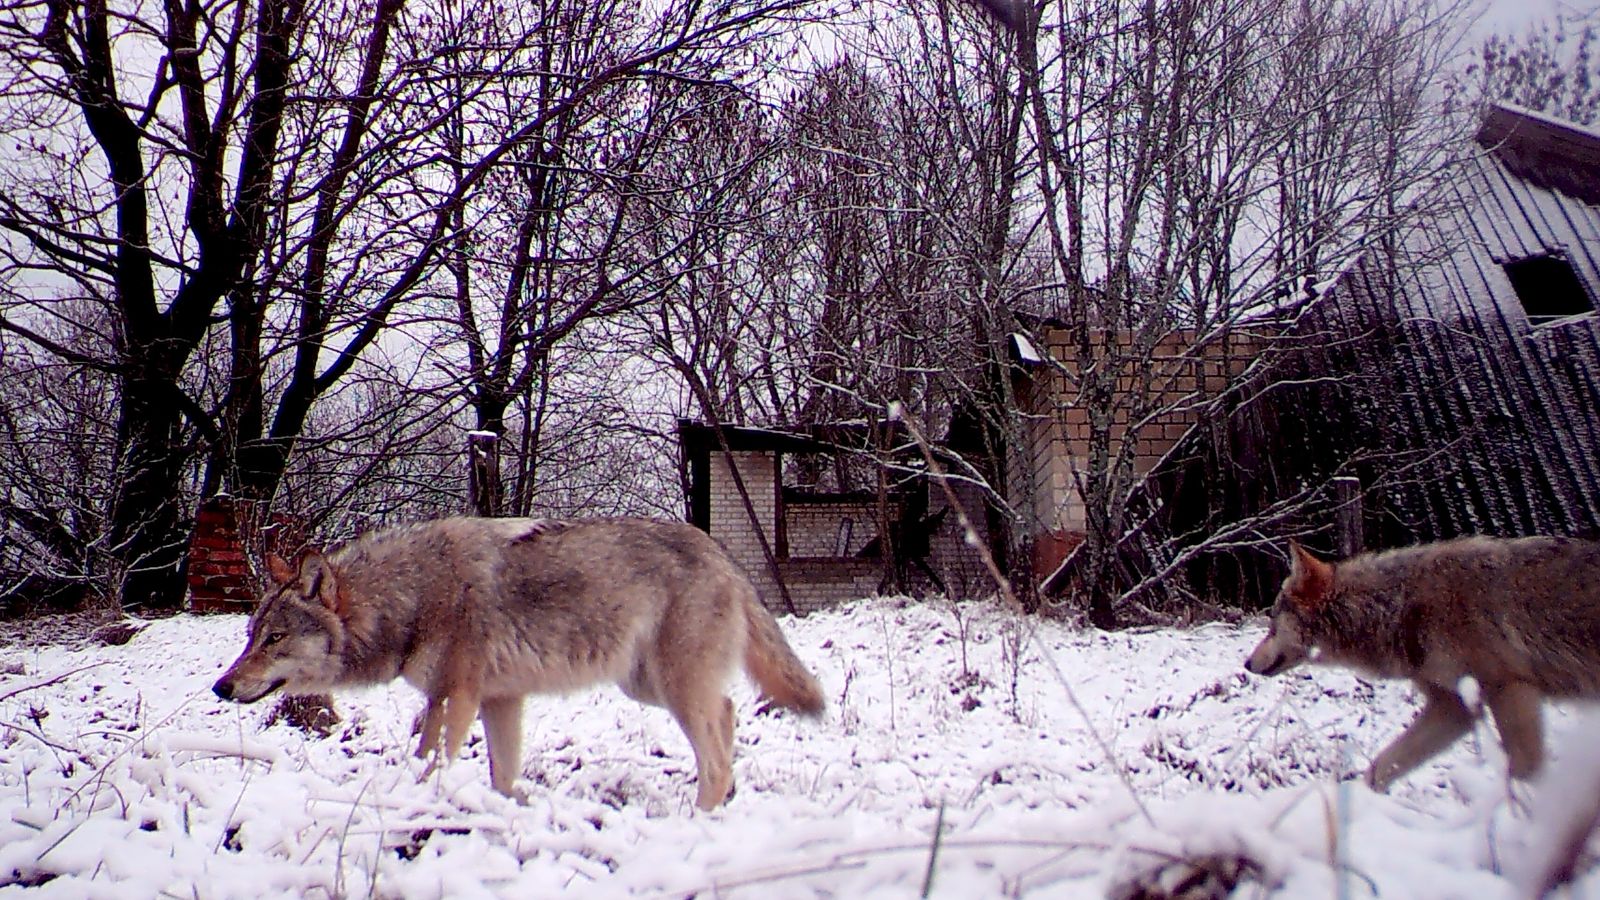 The wolves are exposed to cancer-causing radiation as they roam the wastelands of the abandoned city - with researchers finding part of their genetic 